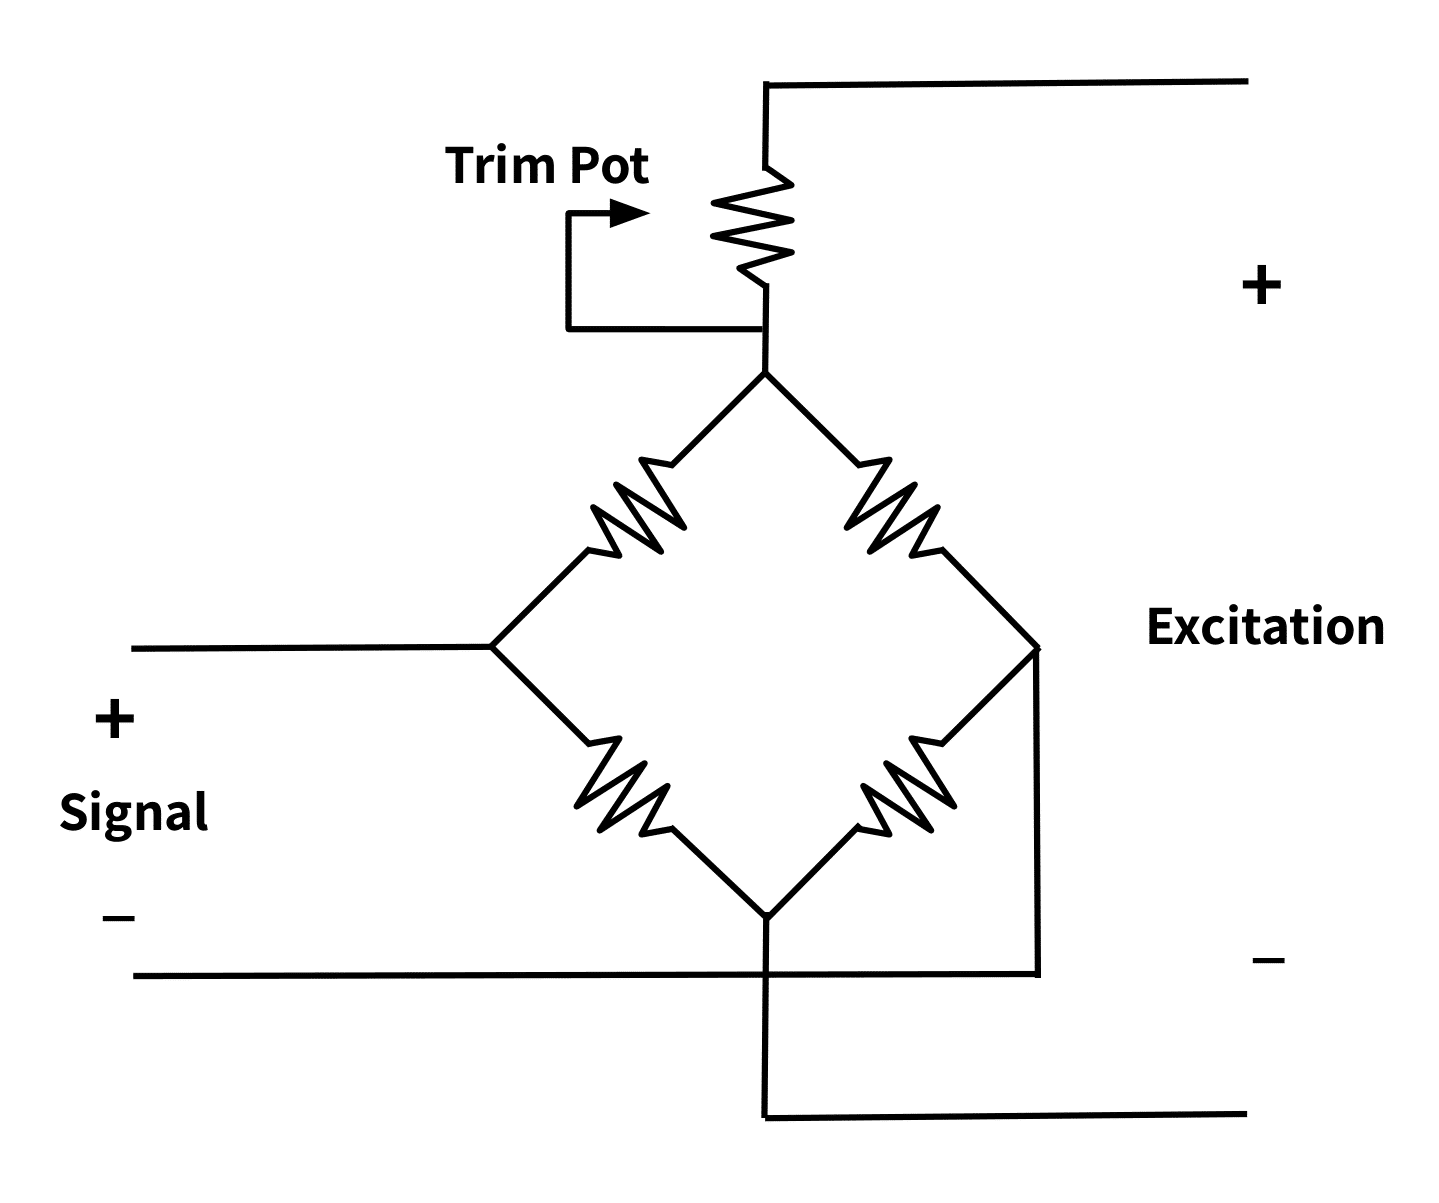 electrical schematic diagram of excitation trimming